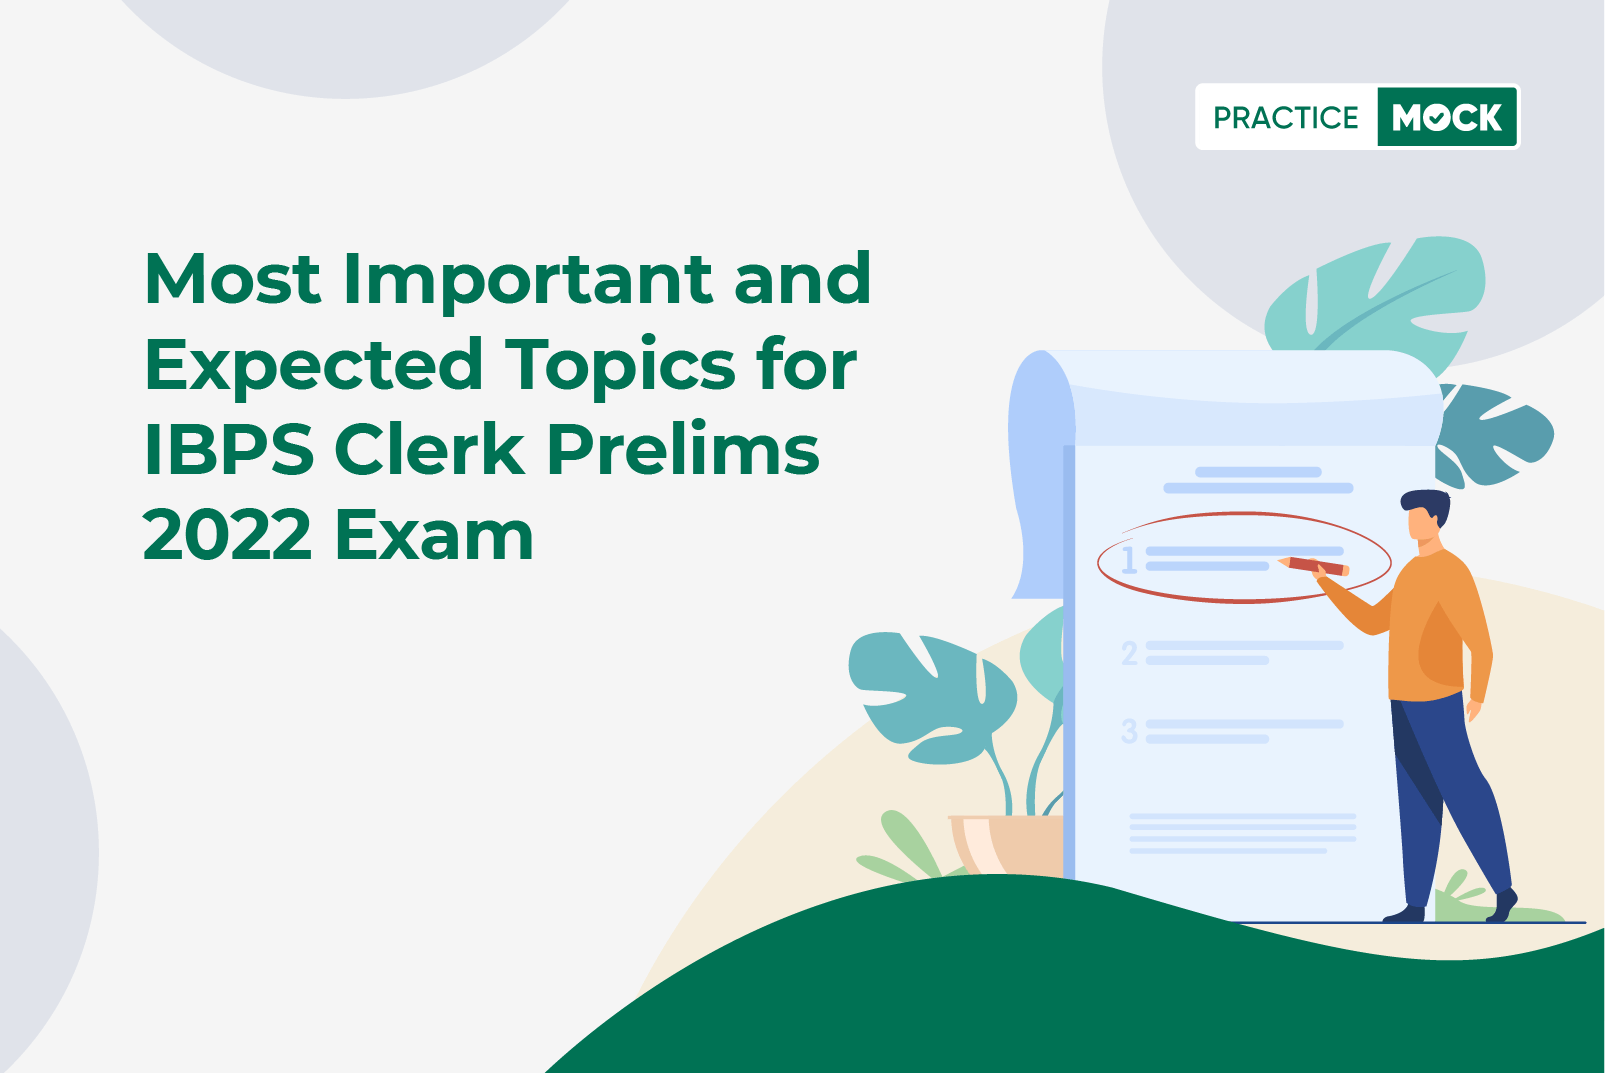 Most Scoring & Expected Topics for IBPS Clerk Prelims 2022 Exam